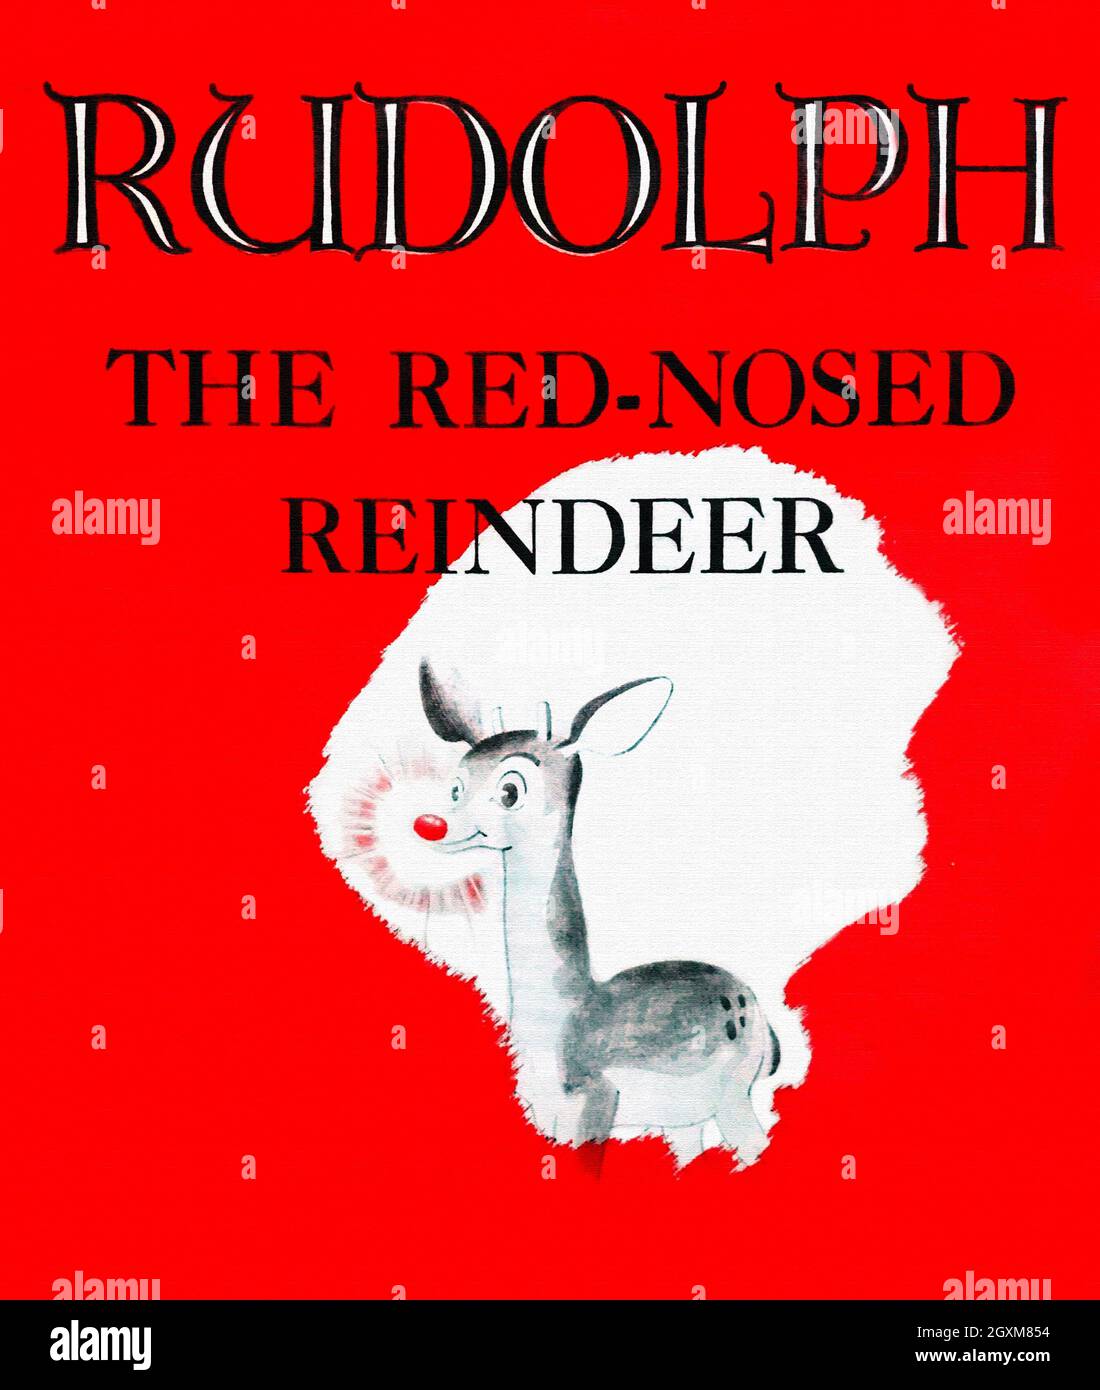 Rudolph the Red-Nosed Reindeer Stock Photo